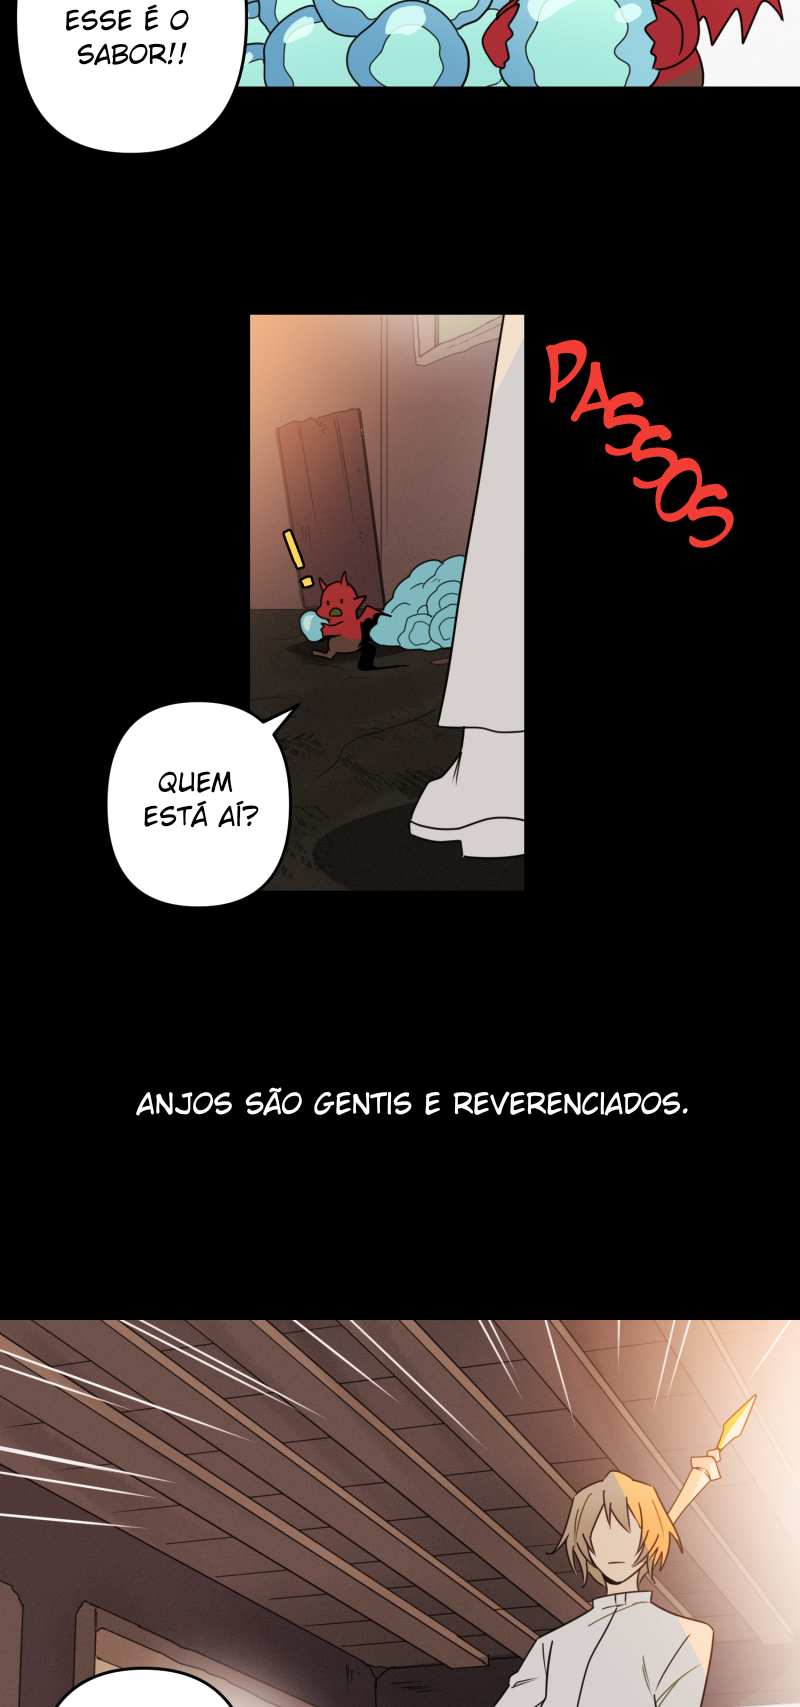 Your Wings and Mine – Dianxia Traduções